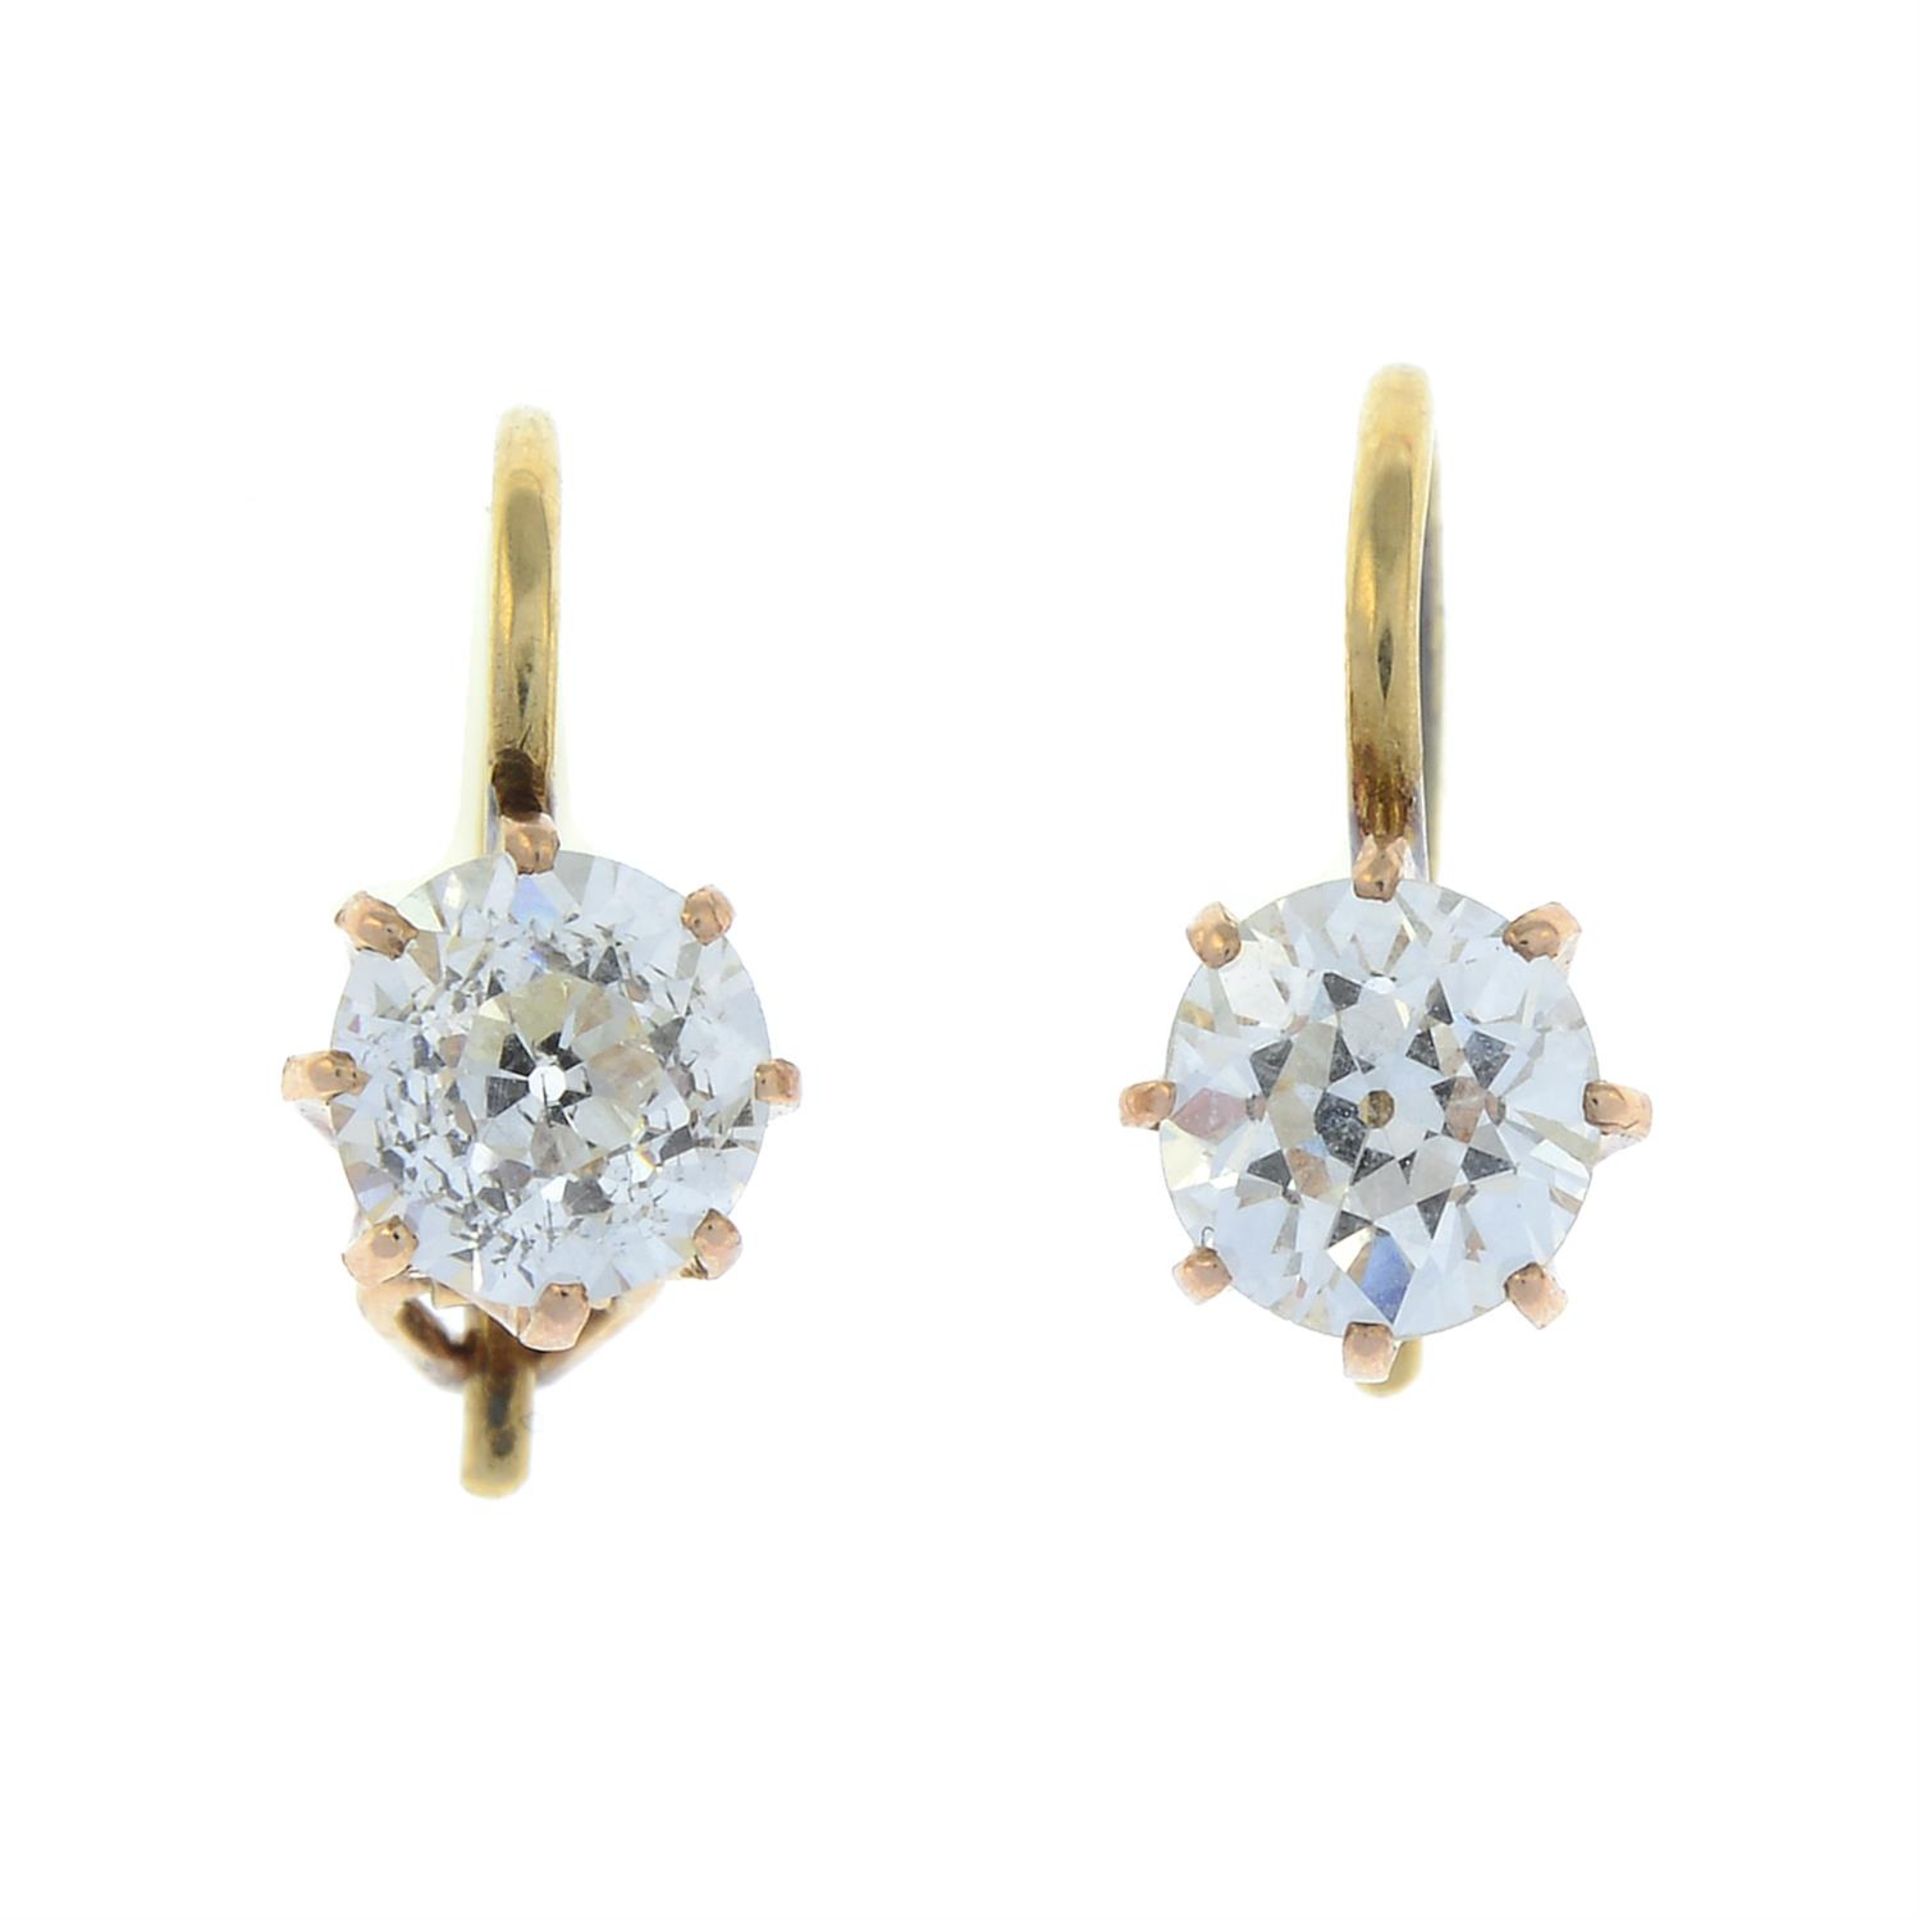 A pair of early 20th century gold old-cut diamond earrings. - Image 2 of 3